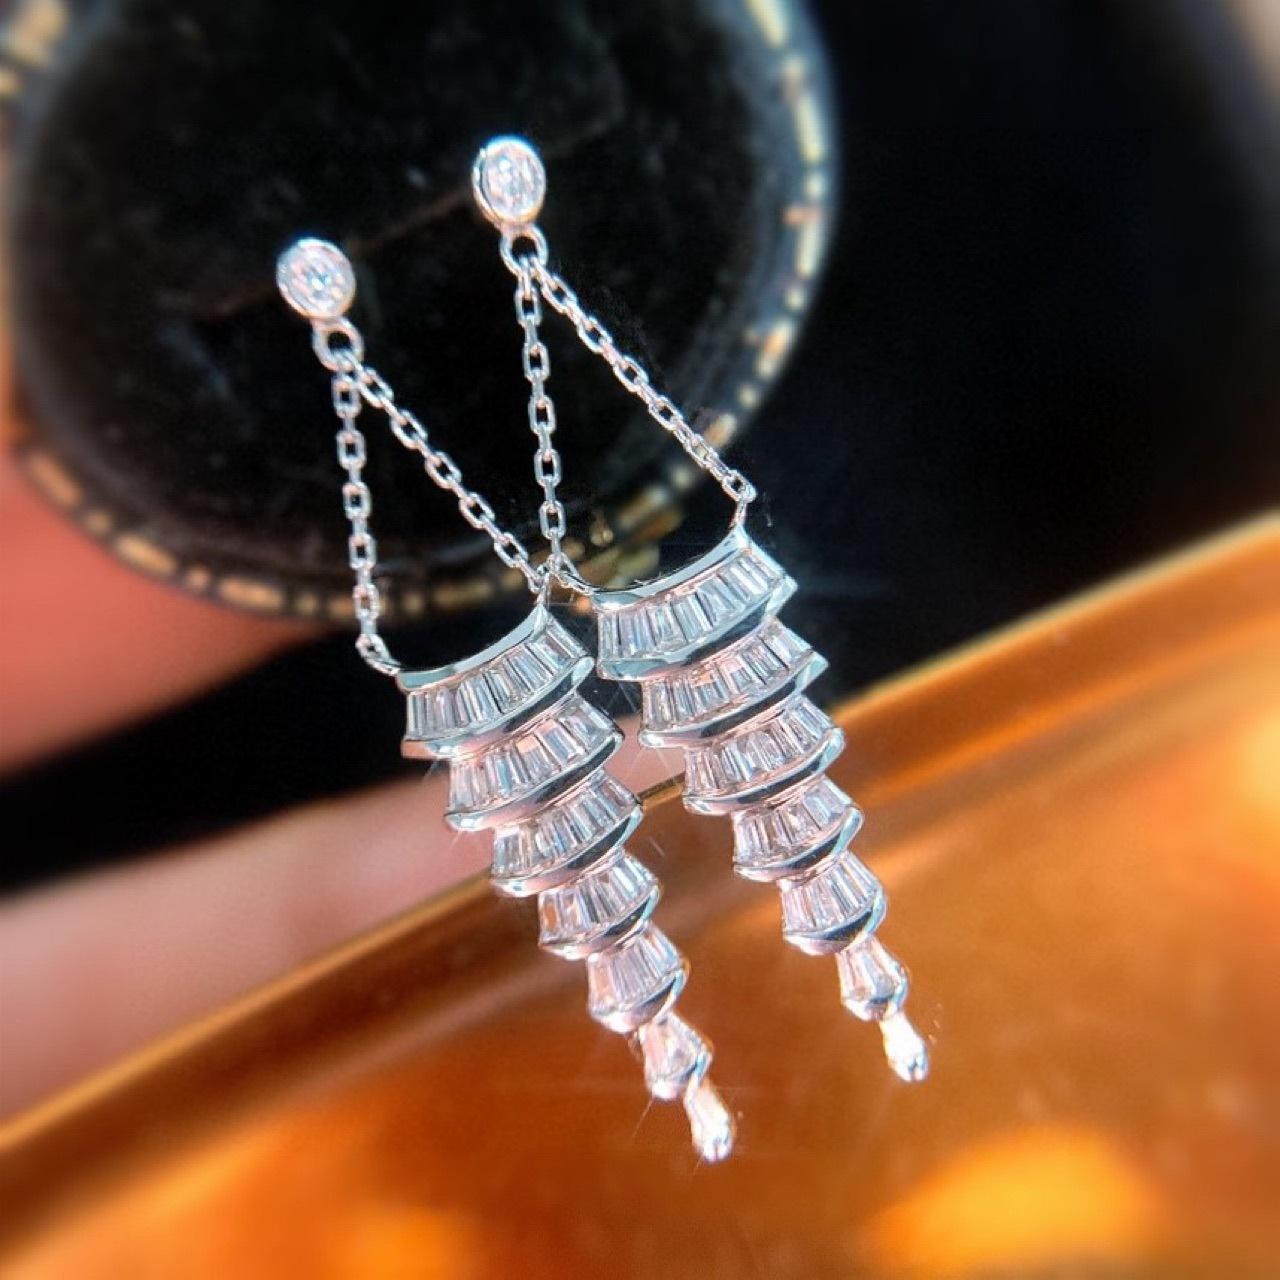 Precious Metal Condition
18K white gold　
Certificate of authenticity
Appraisal certificate 
color
18k Gold Diamond Drop Earrings
purity
AU750
style
diamond
modeling
geometric